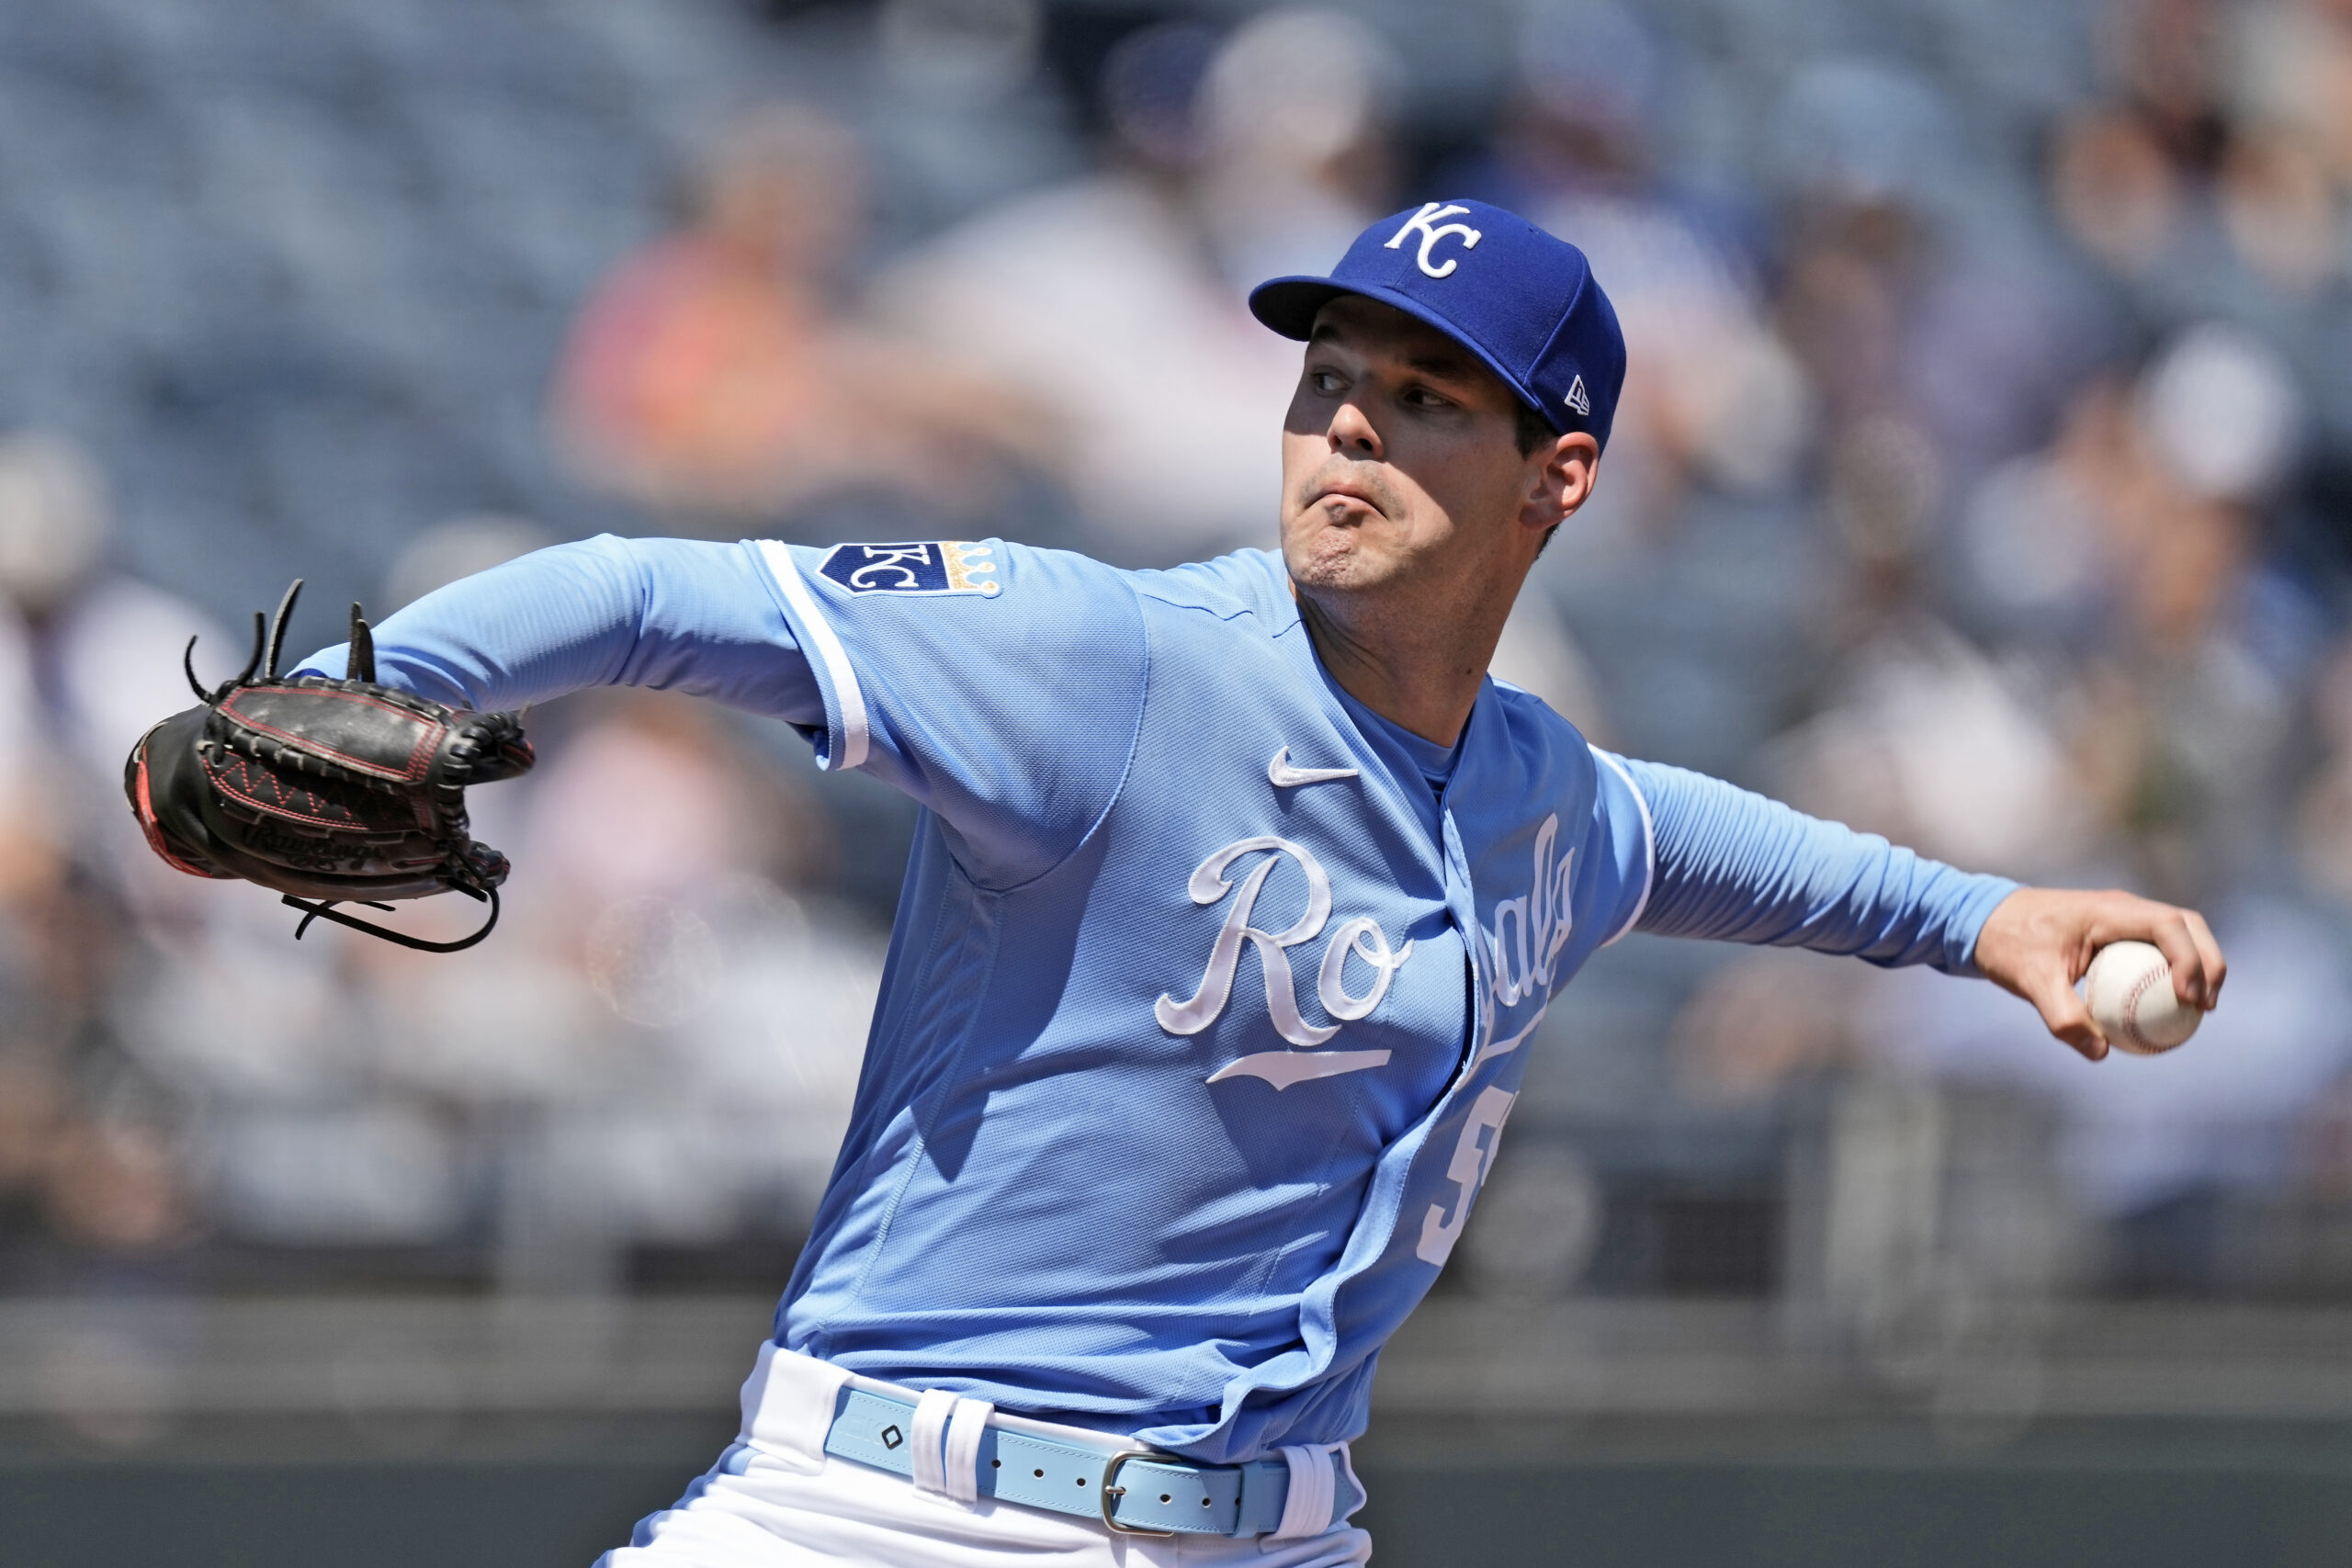 Ragans gem and solo home runs get the Royals a win